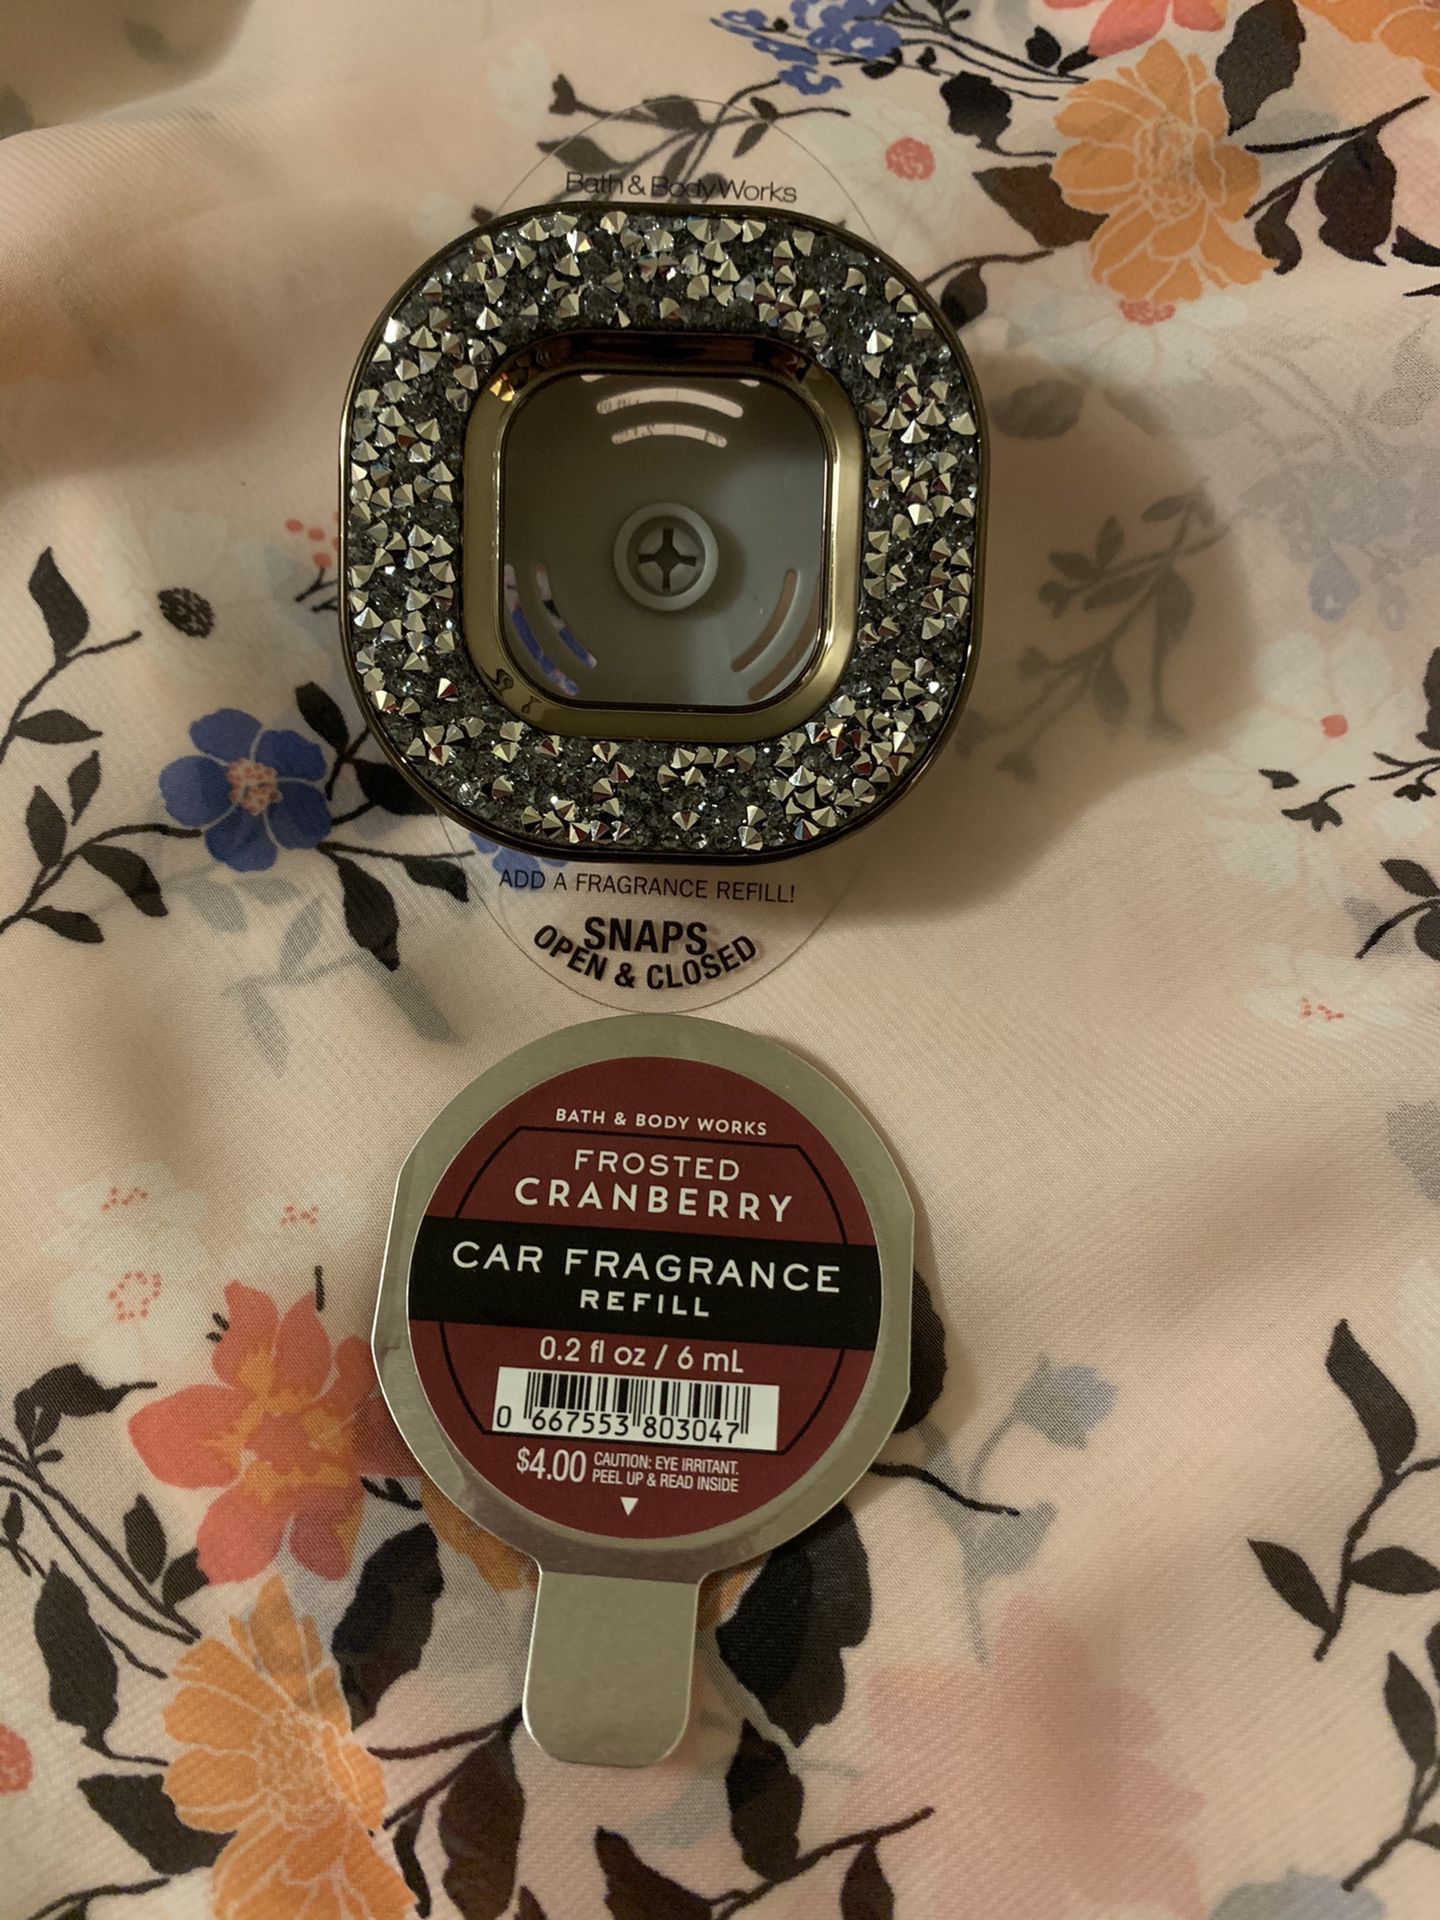 Bath and Body Works Car Fragrance Clip and Refill